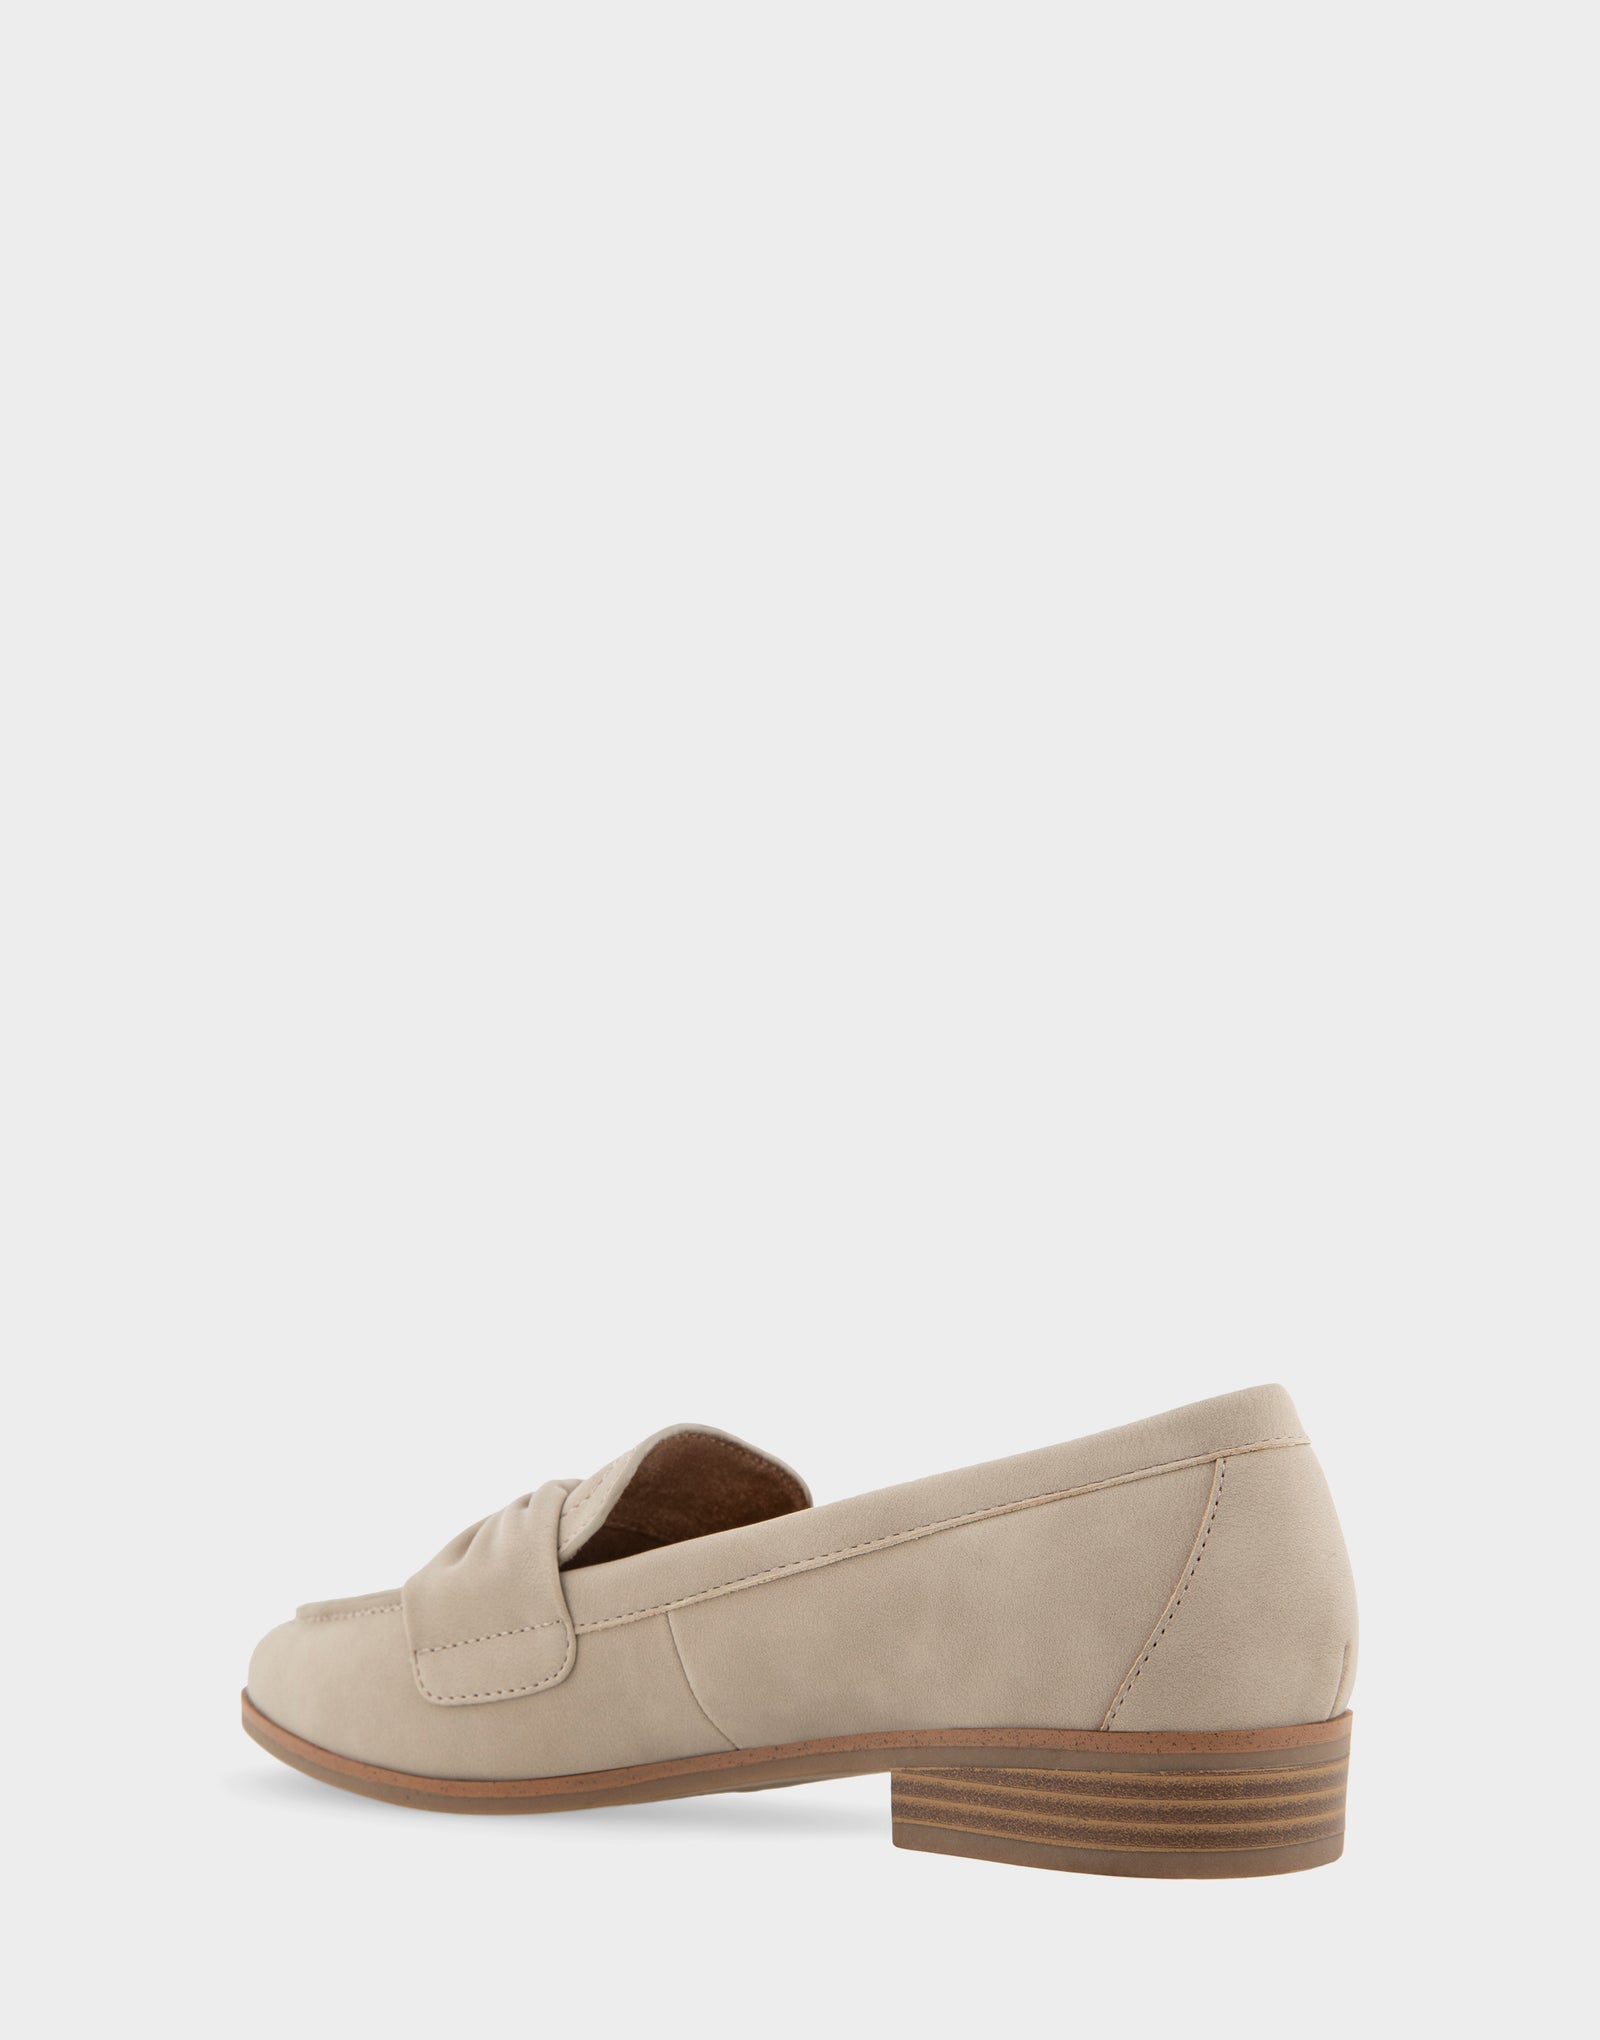 Women's Tailored Loafer in Pale Khaki Faux Leather